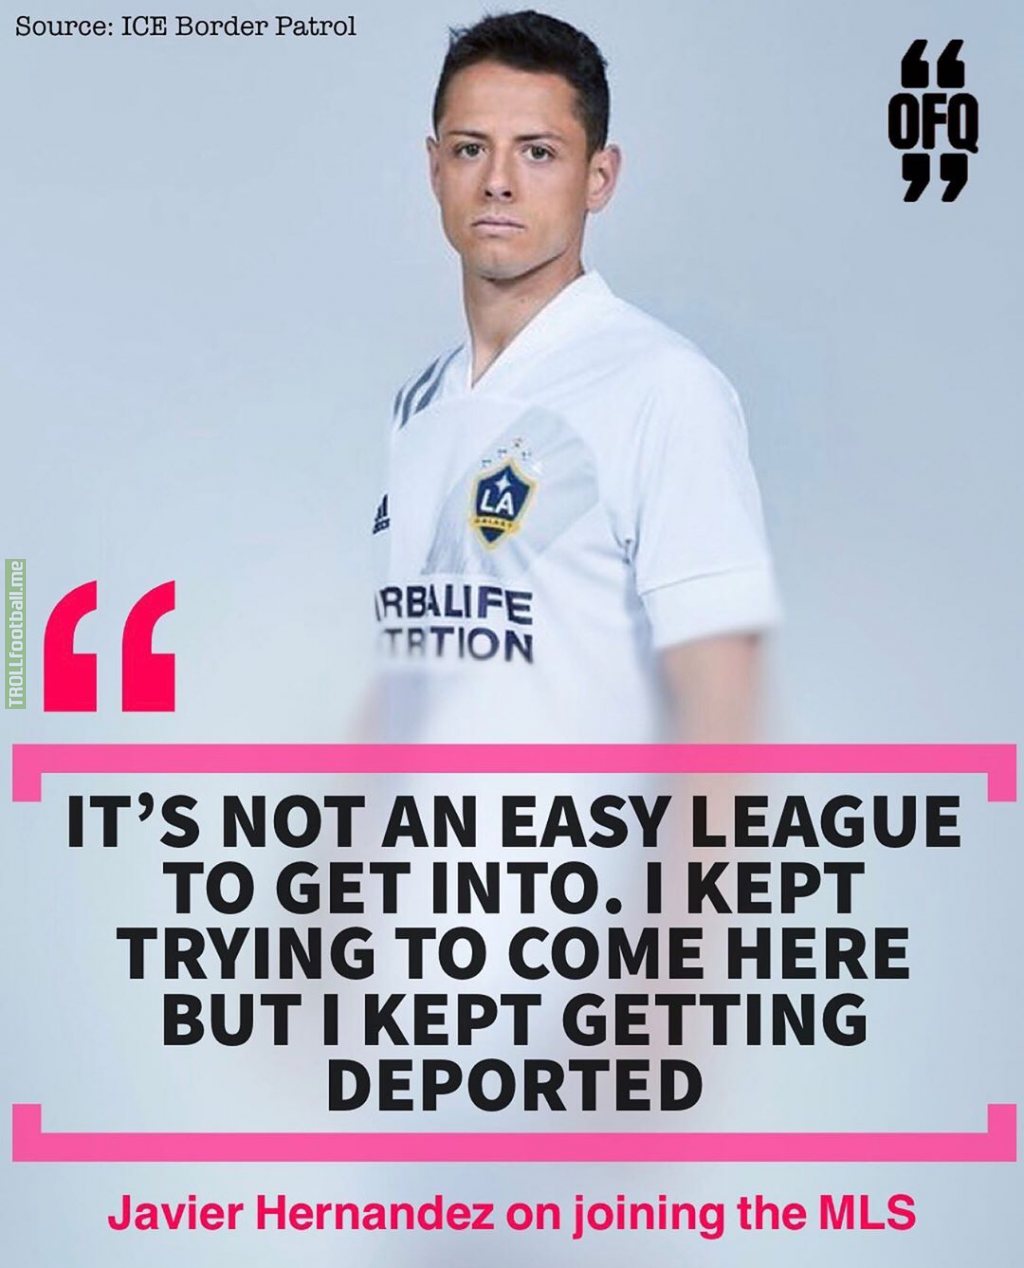 Chicharito on joining MLS: ''It's not an easy league to get into. I kept trying to come here but I kept getting deported.''